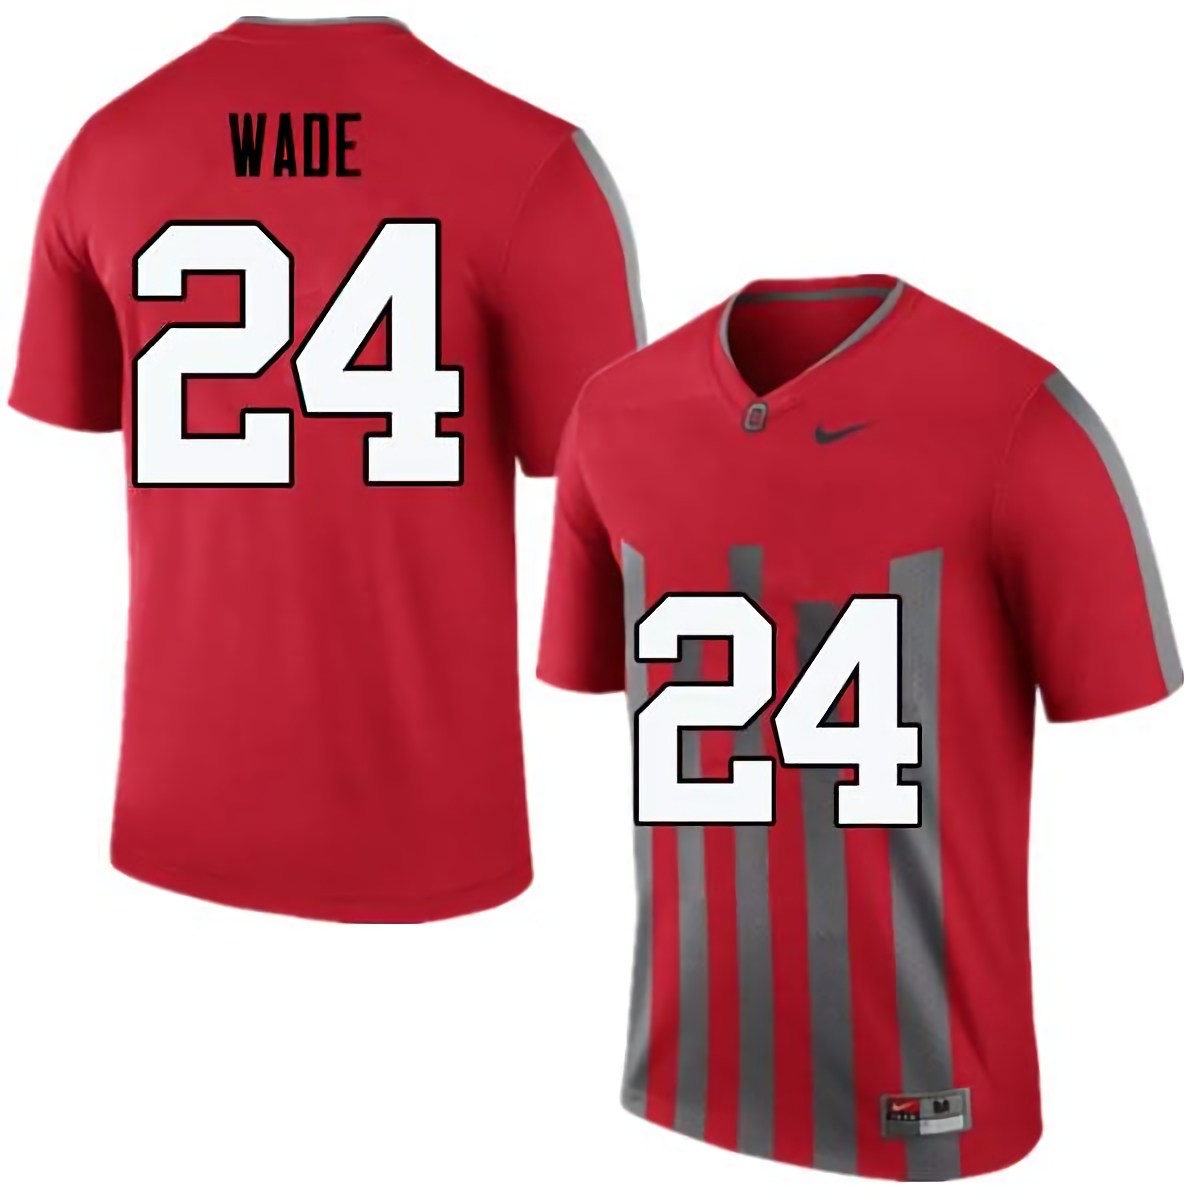 Shaun Wade Ohio State Buckeyes Men's NCAA #24 Nike Throwback Red College Stitched Football Jersey PNR2256BQ